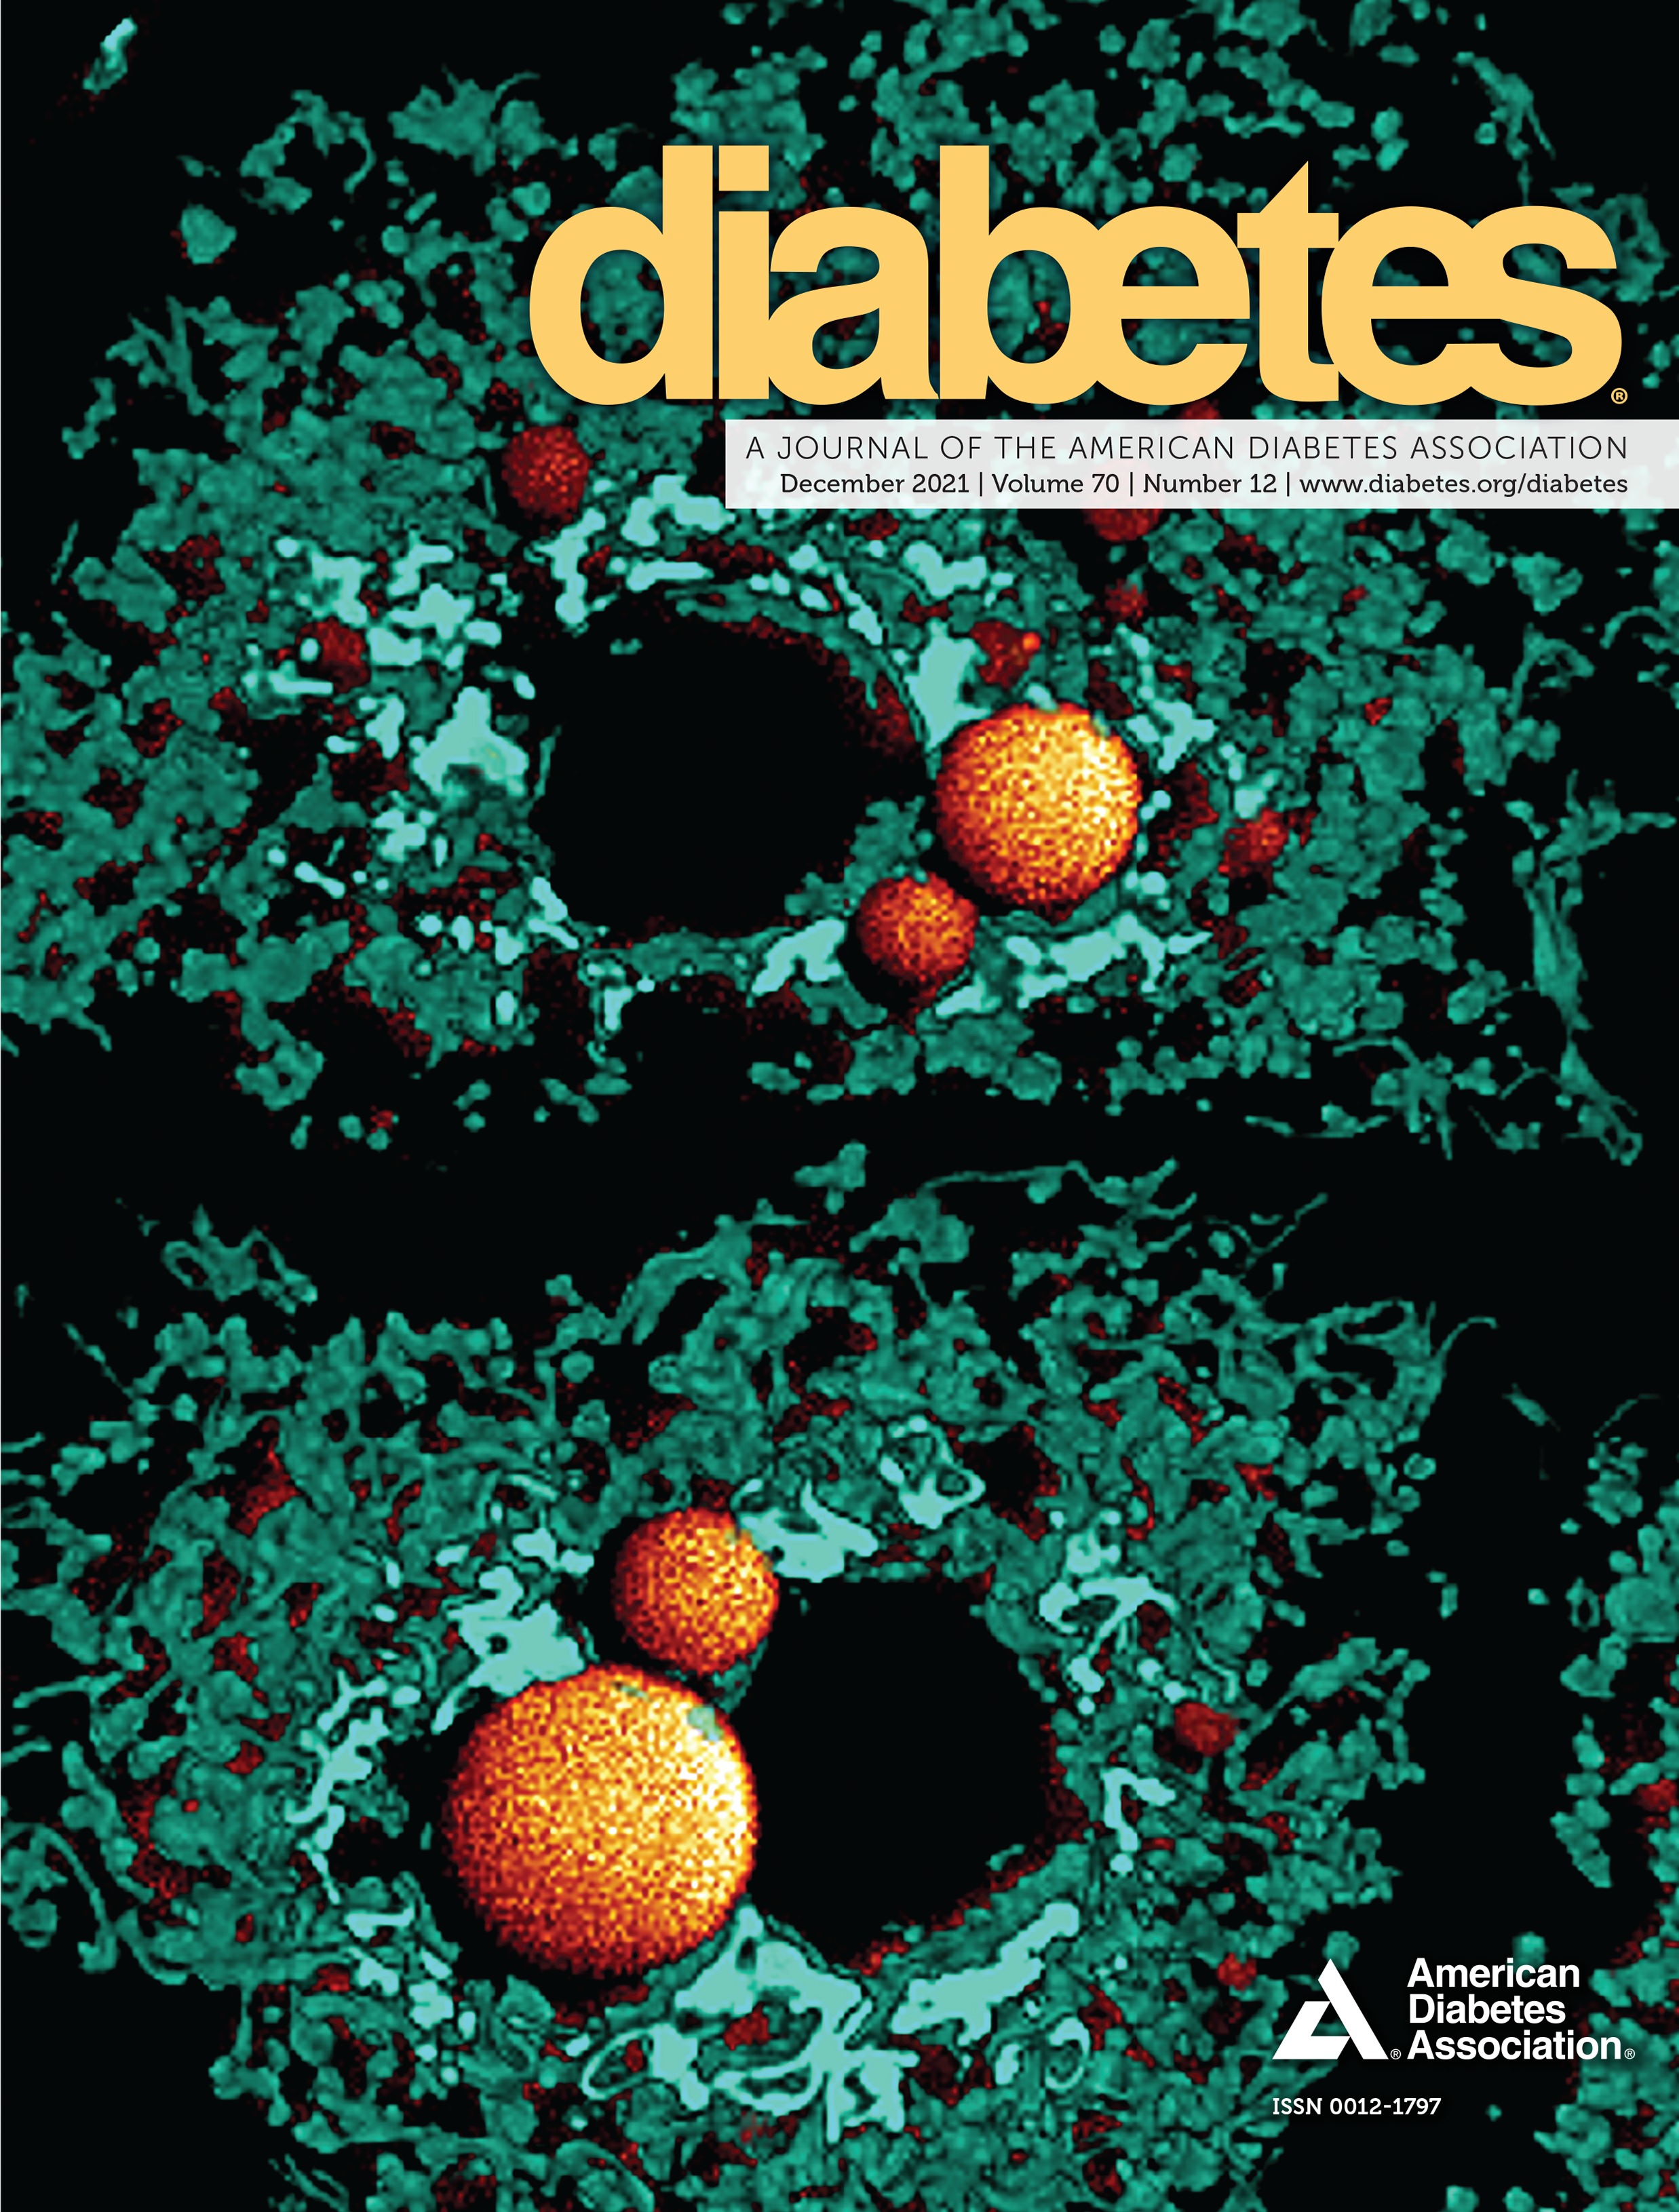 Diabetes, Drug Treatment, and Mortality in COVID-19: A Multinational Retrospective Cohort Study